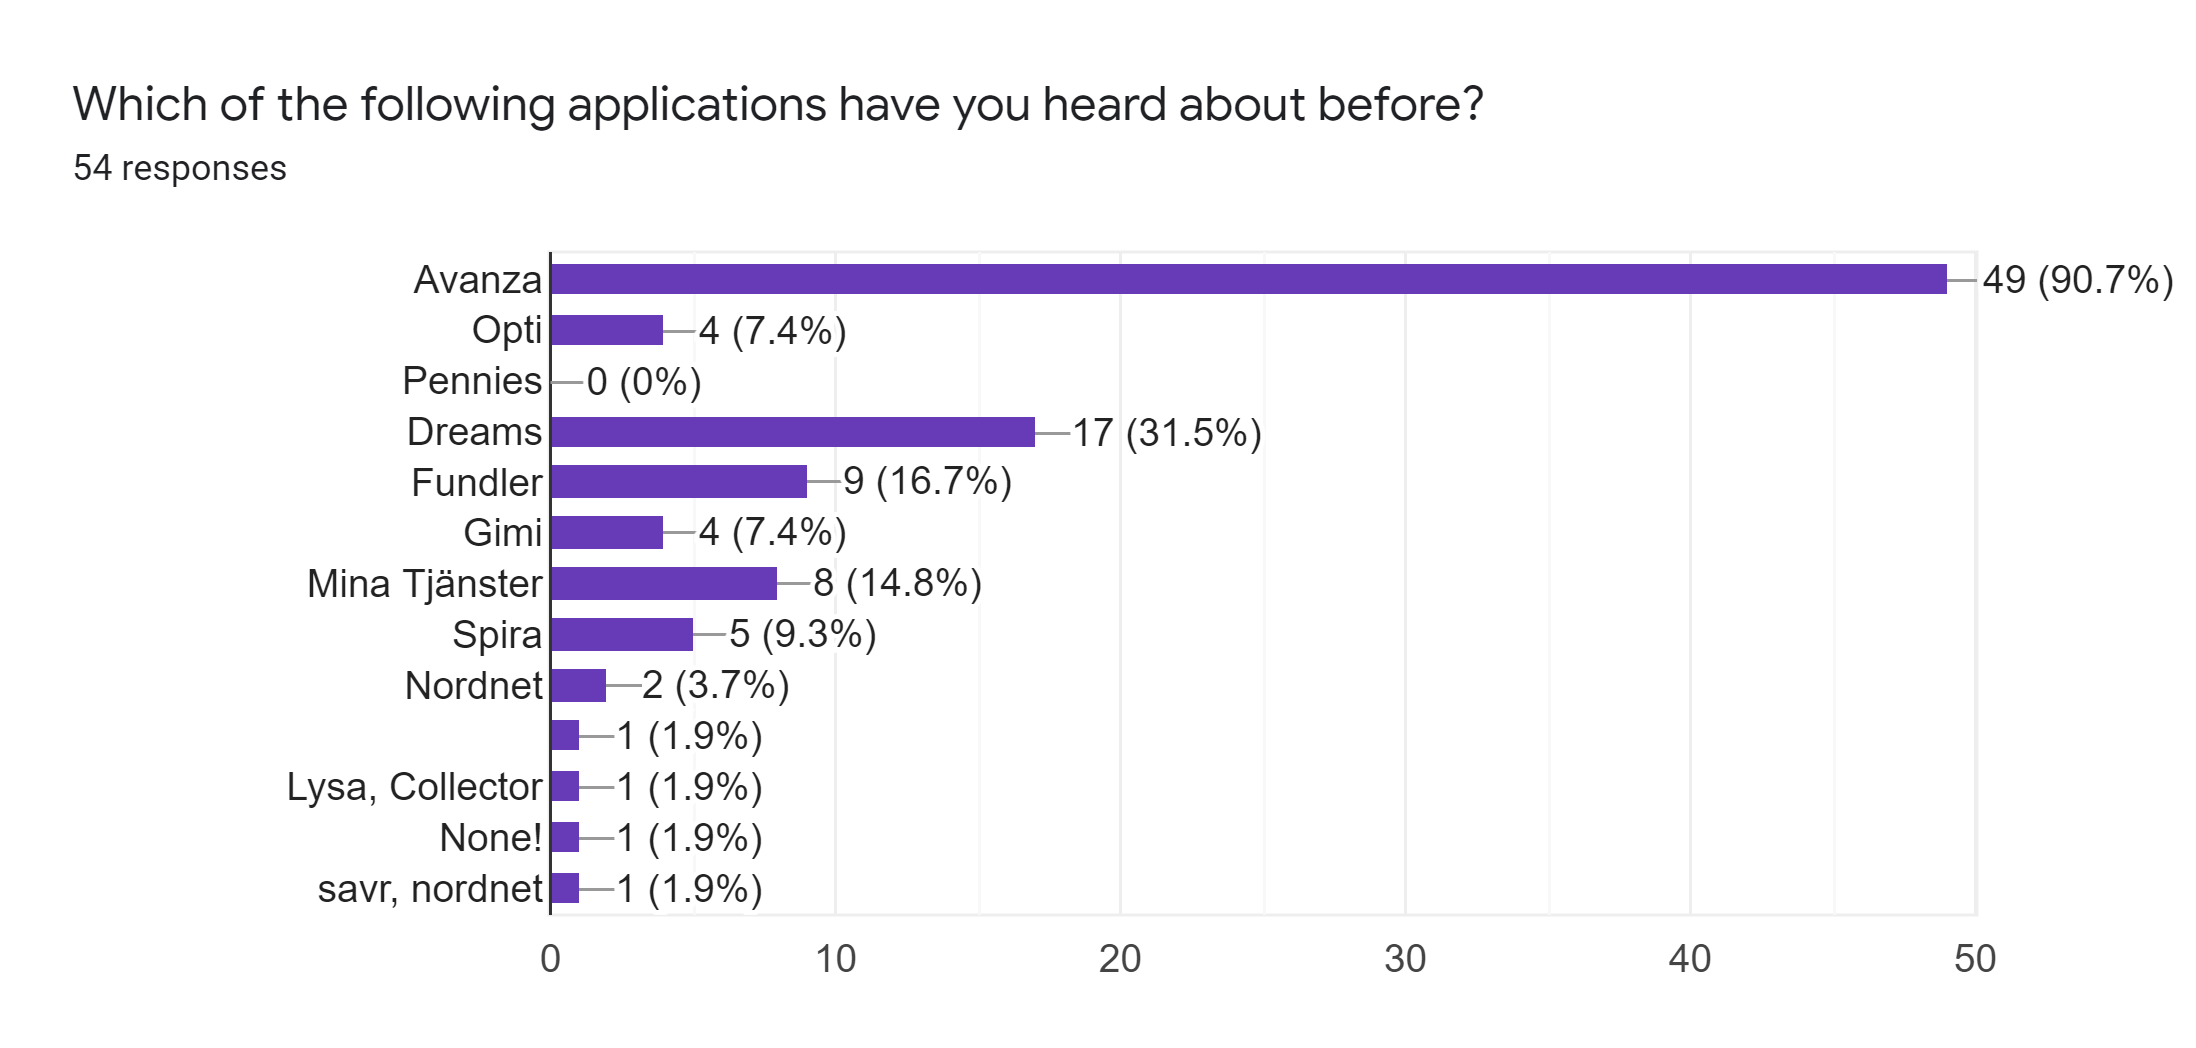 Survey results about what app they have heard about: Avanza 90%, Dreams 17%, Fundler 16.7%. 